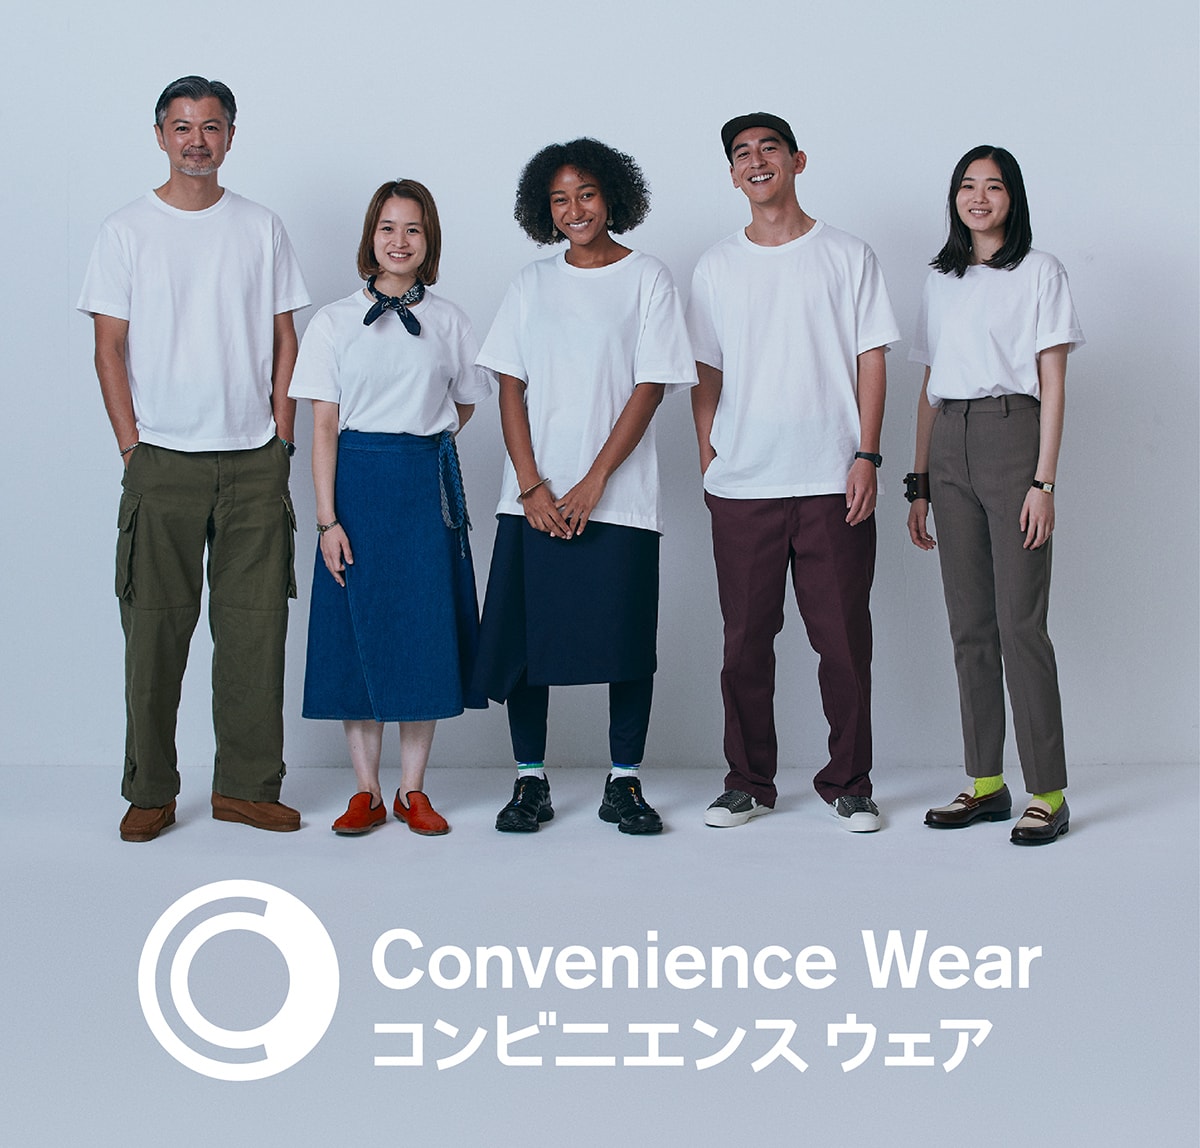 FamilyMart Convenience Wear - 5 people in white shirts